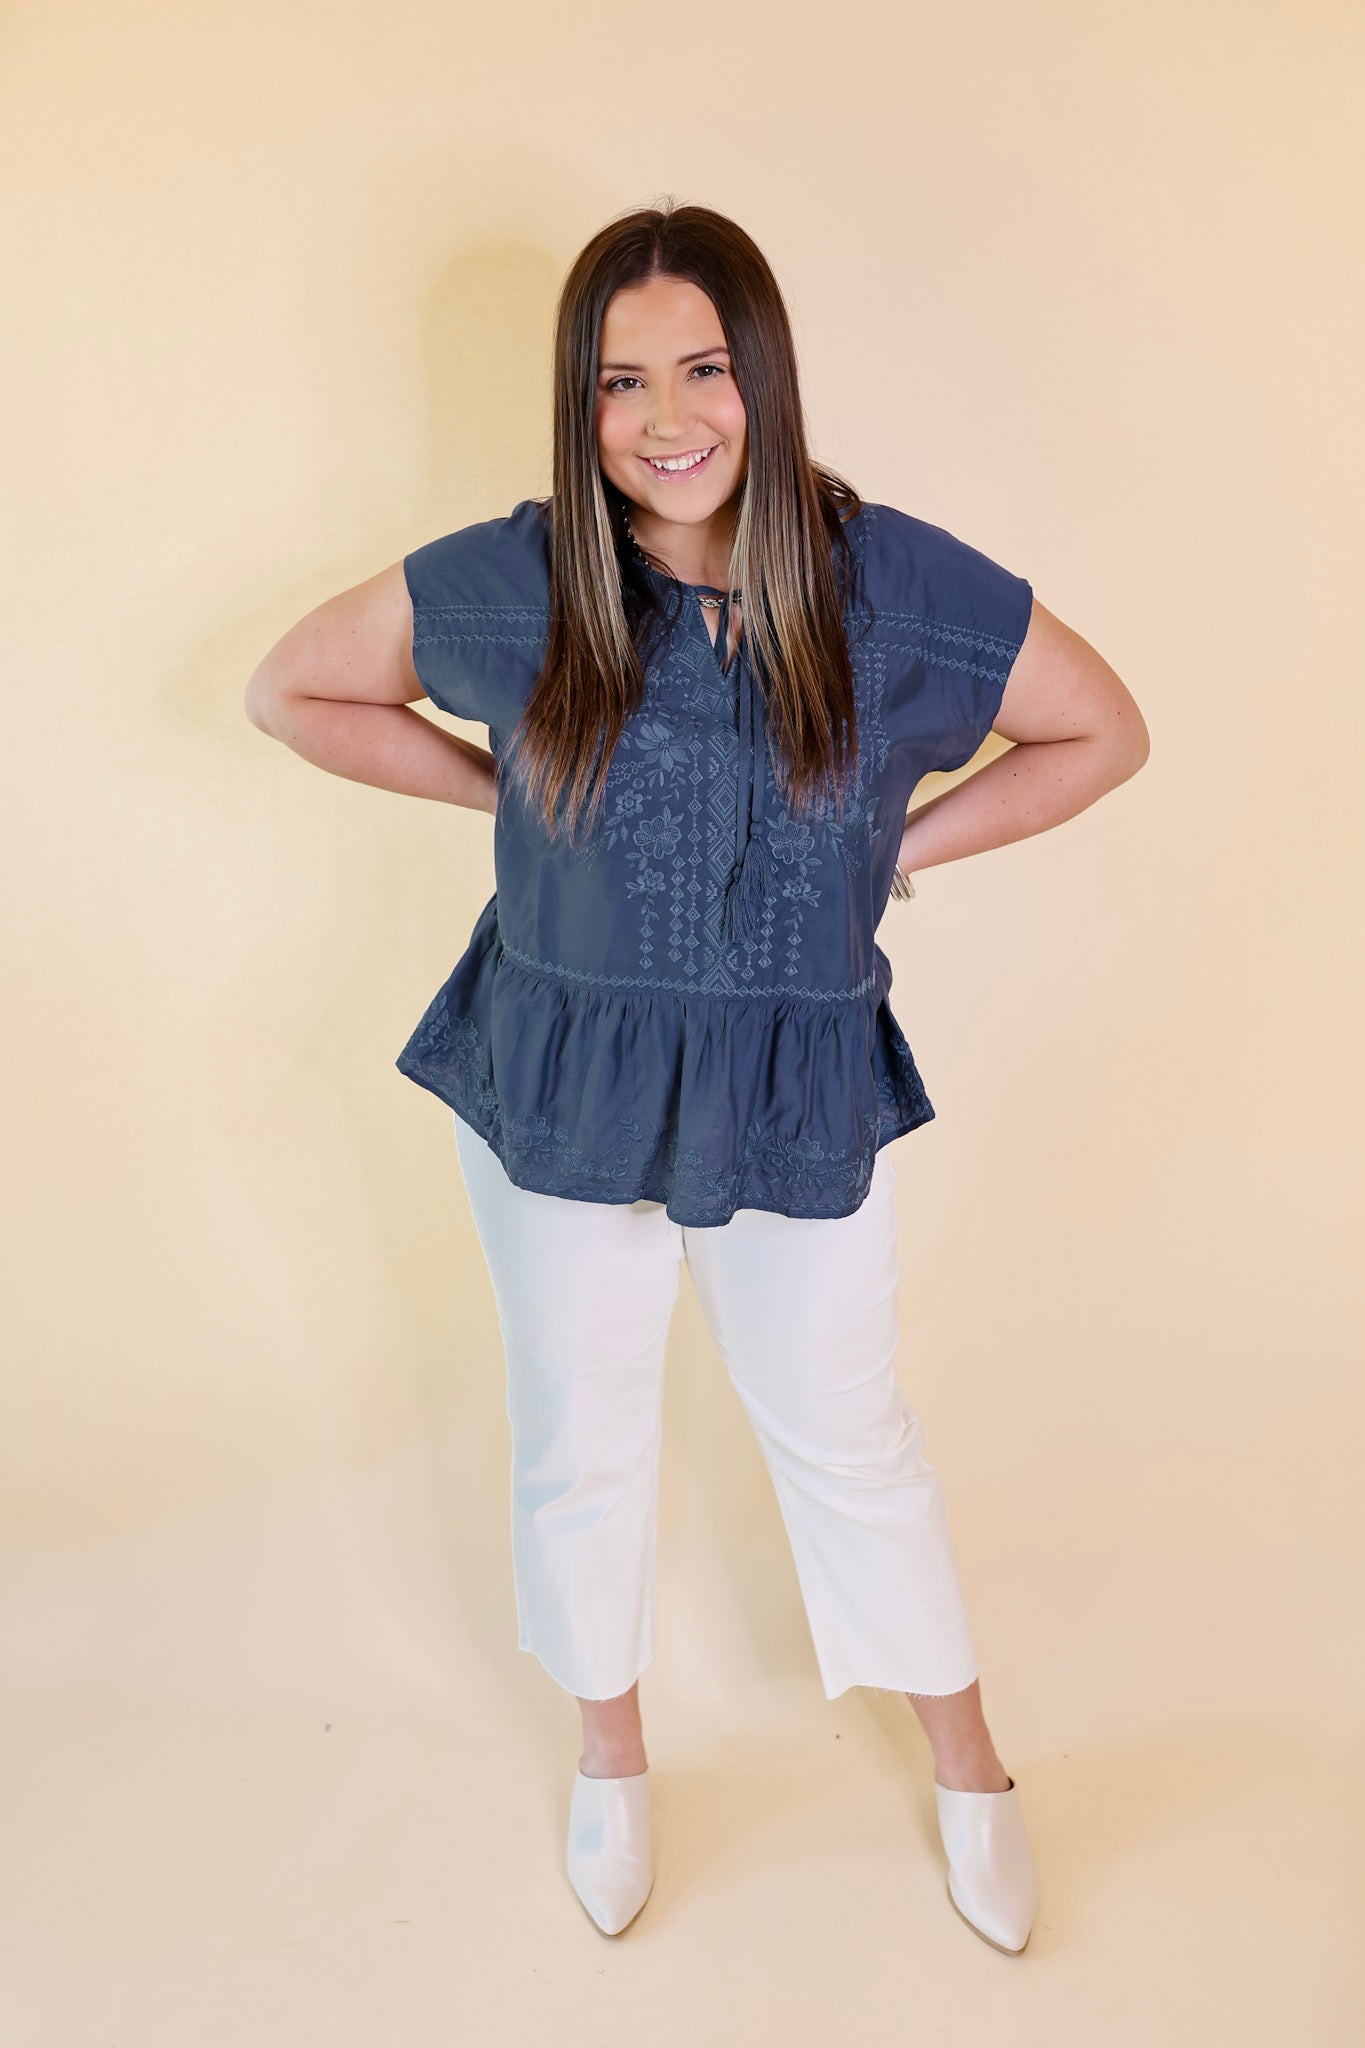 Craving Sunshine Embroidered Cap Sleeve Top with Keyhole in Navy - Giddy Up Glamour Boutique